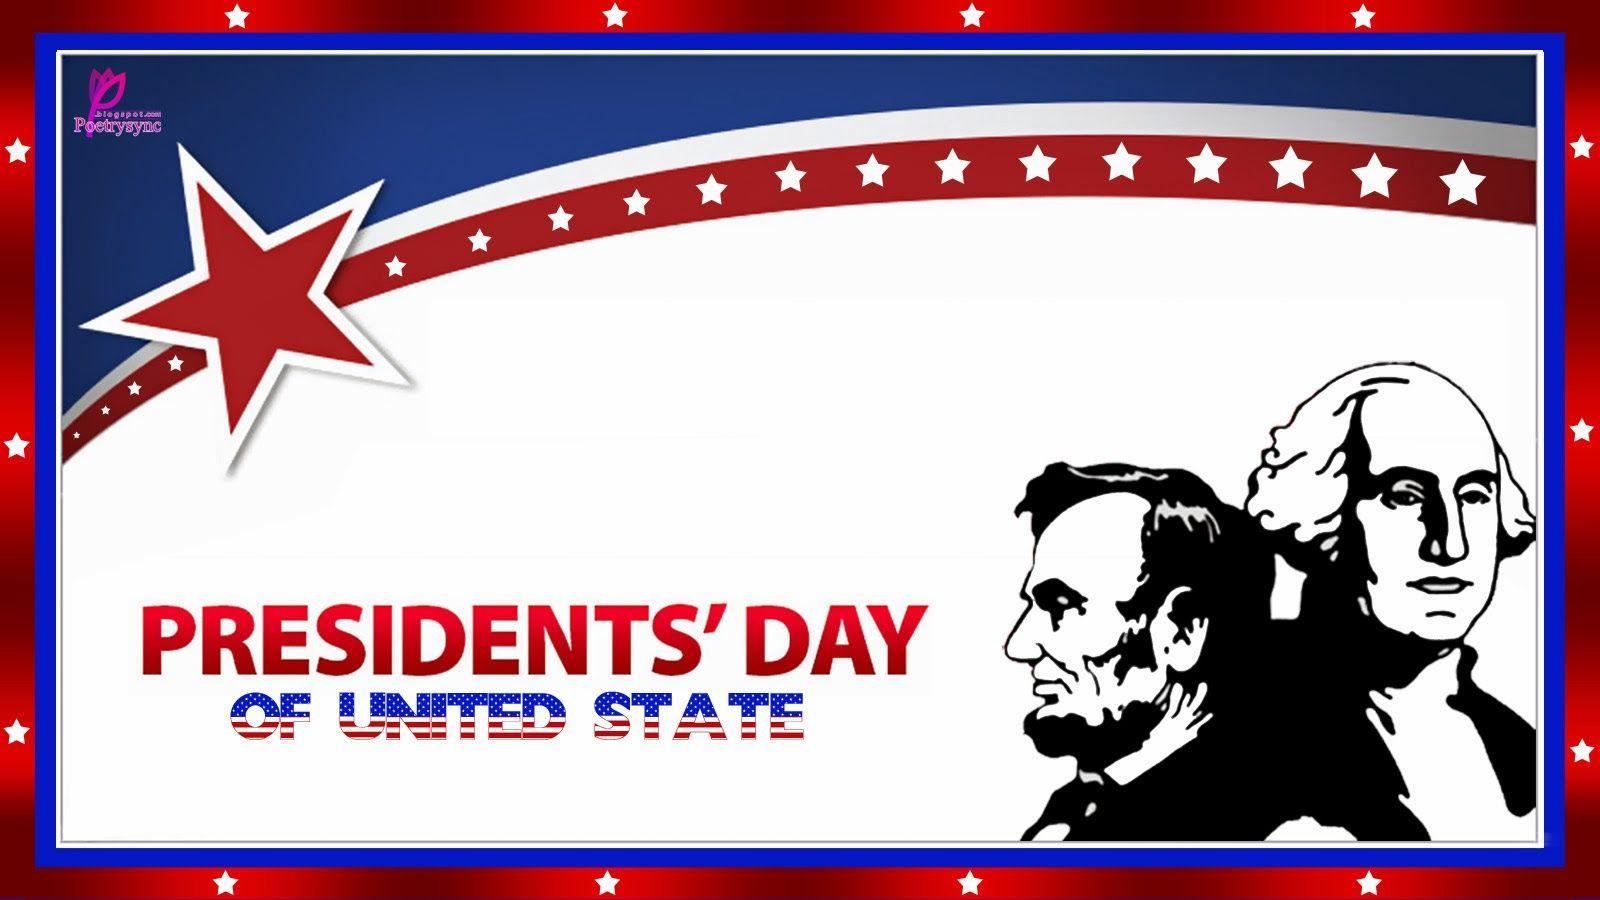 Presidents&; Day Greeting Image and Wallpaper with Wishes Quotes